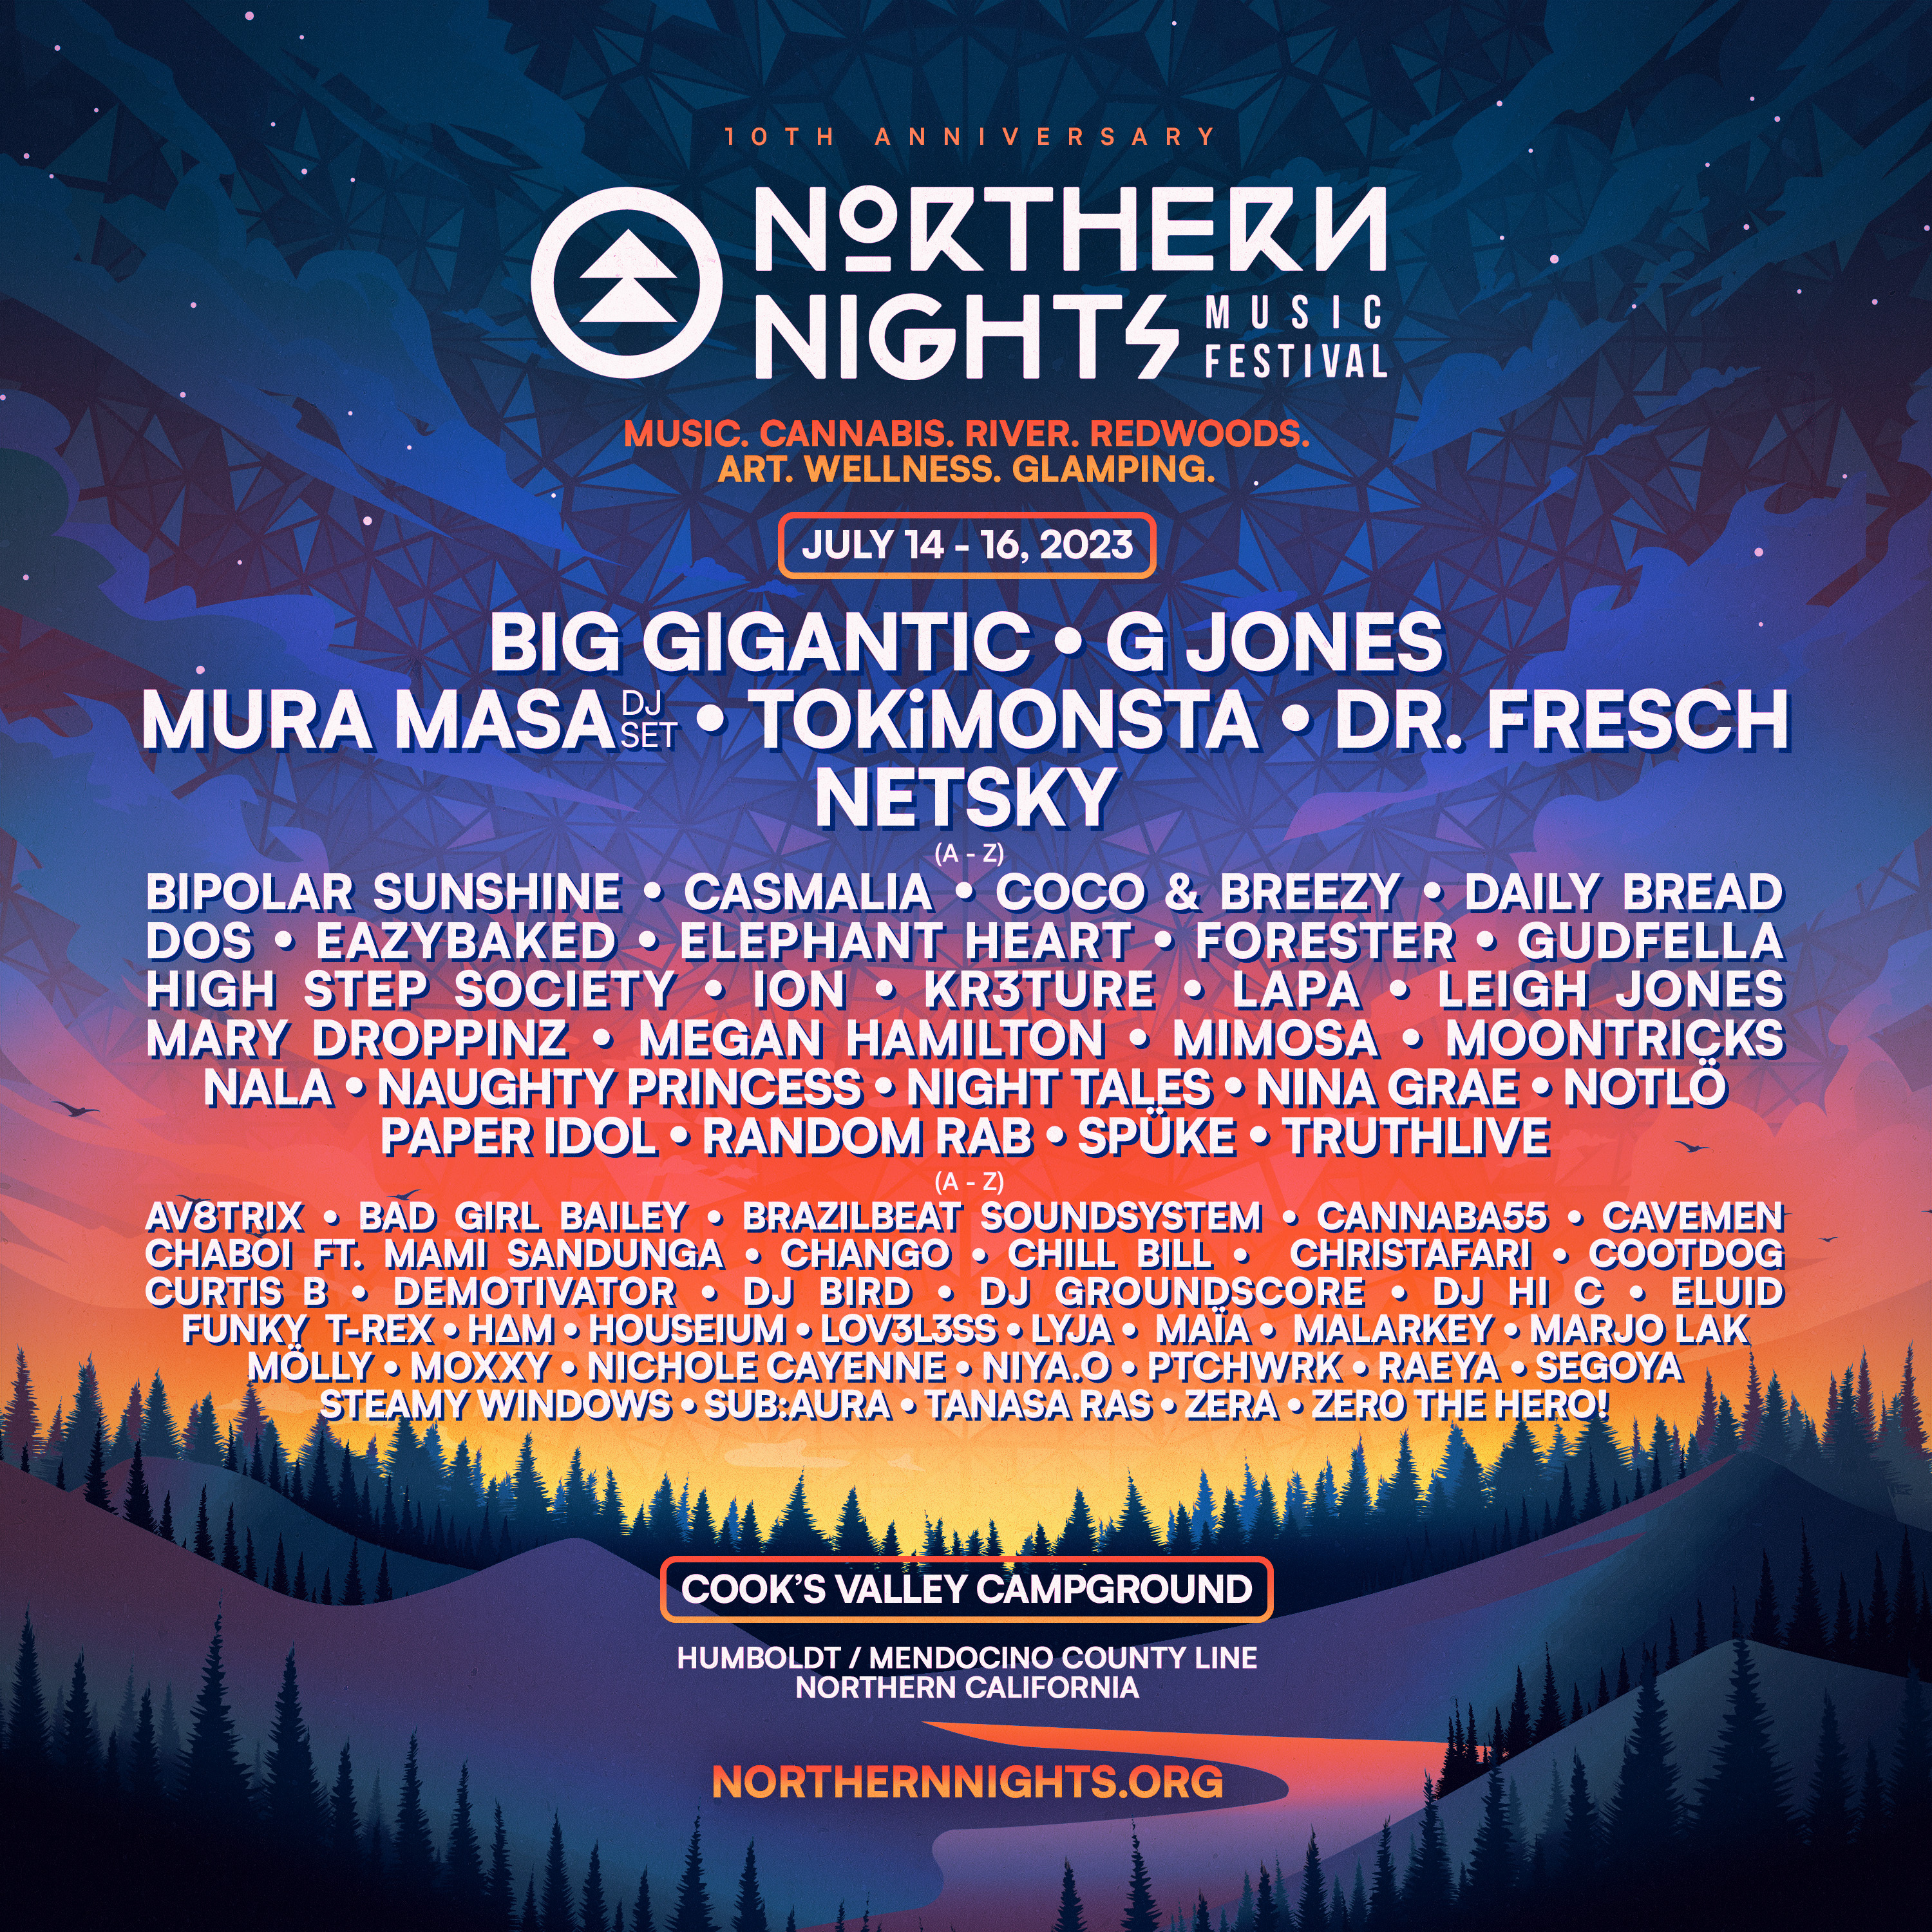 Northern Nights Music Festival Announces Phase Two Music Lineup and Additional Cannabis Details for 10th Anniversary